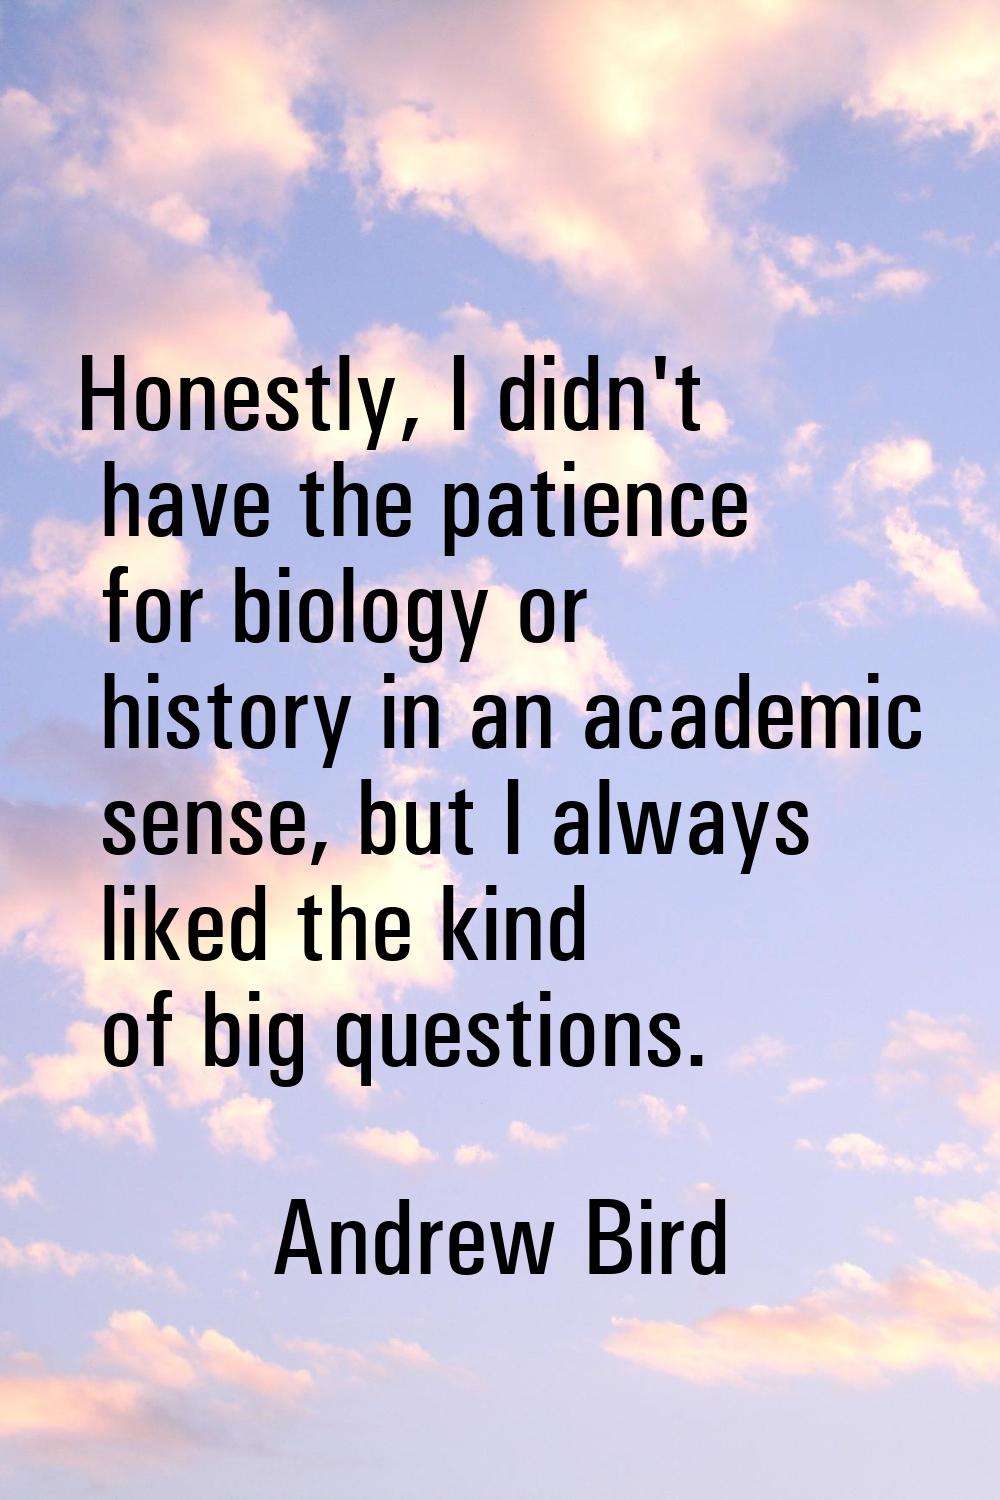 Honestly, I didn't have the patience for biology or history in an academic sense, but I always like